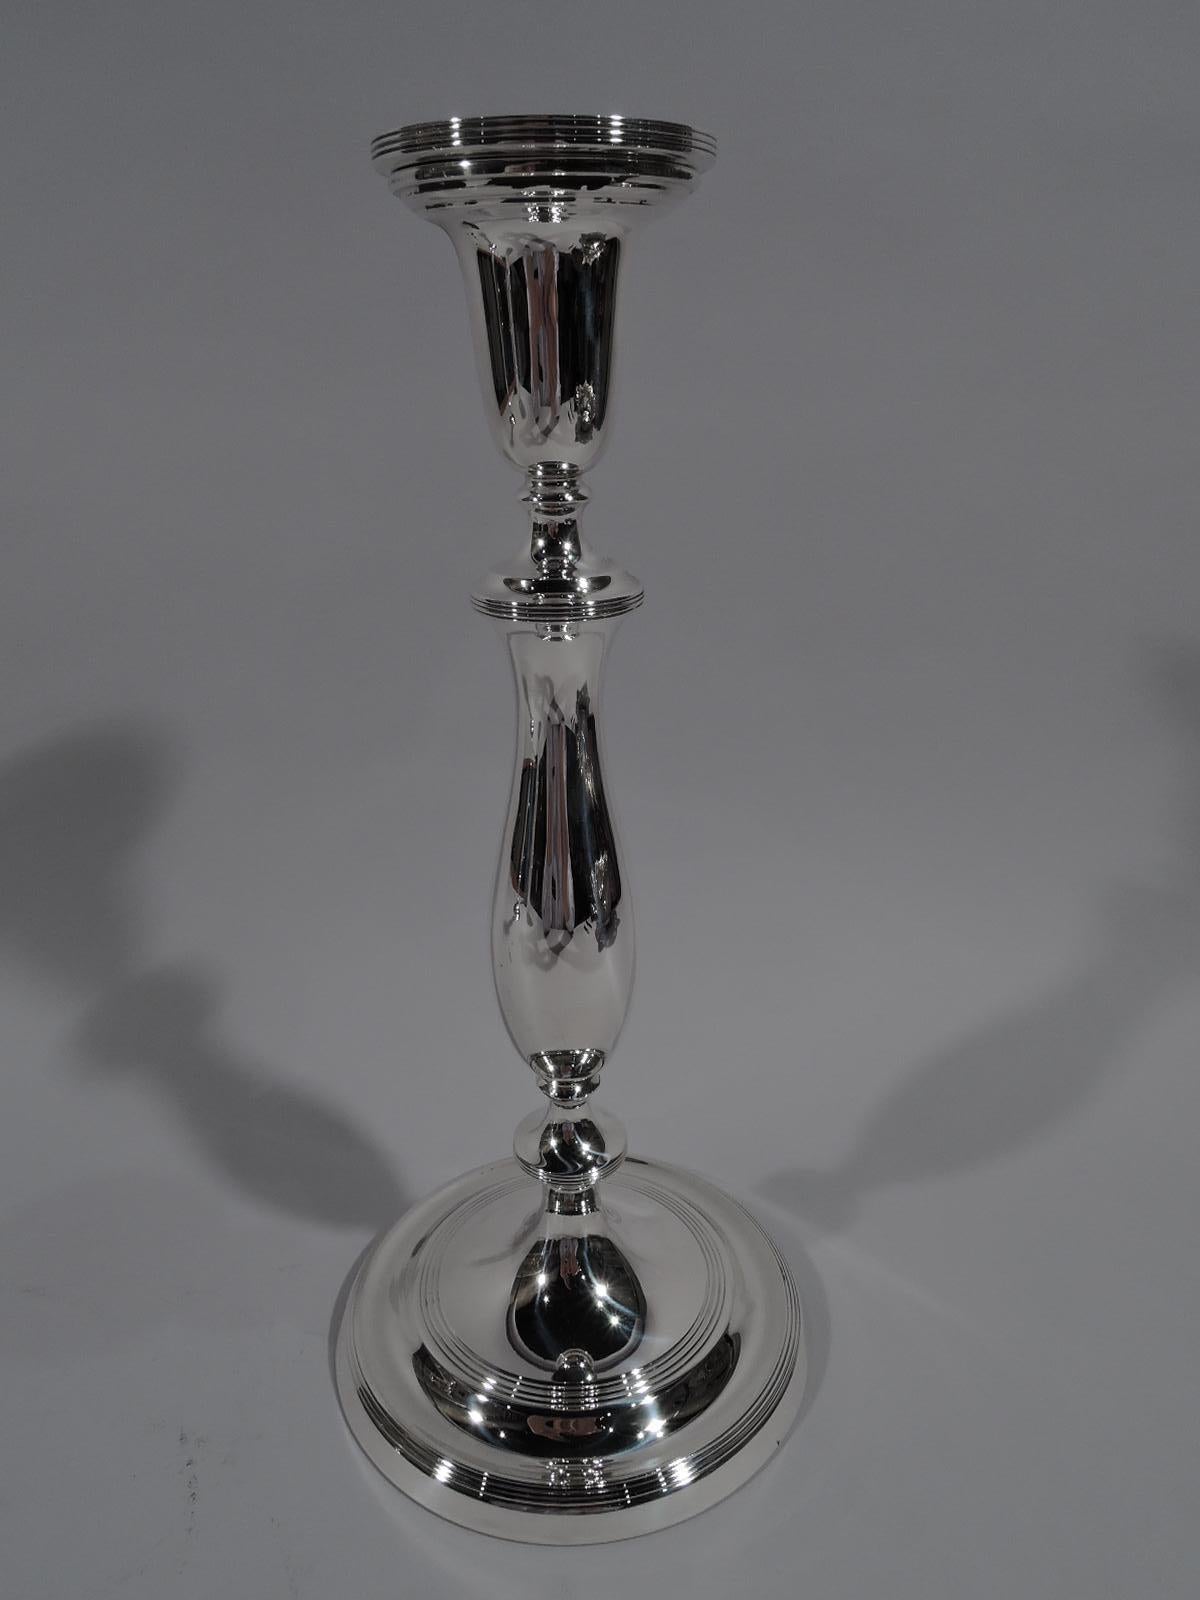 Pair of Modern Georgian sterling silver candlesticks. Made by Blackinton in North Attleboro, Mass., circa 1940. Knopped baluster shaft on domed foot. Reeding. A voluptuous interpretation of a traditional form. Fully marked and numbered A100.